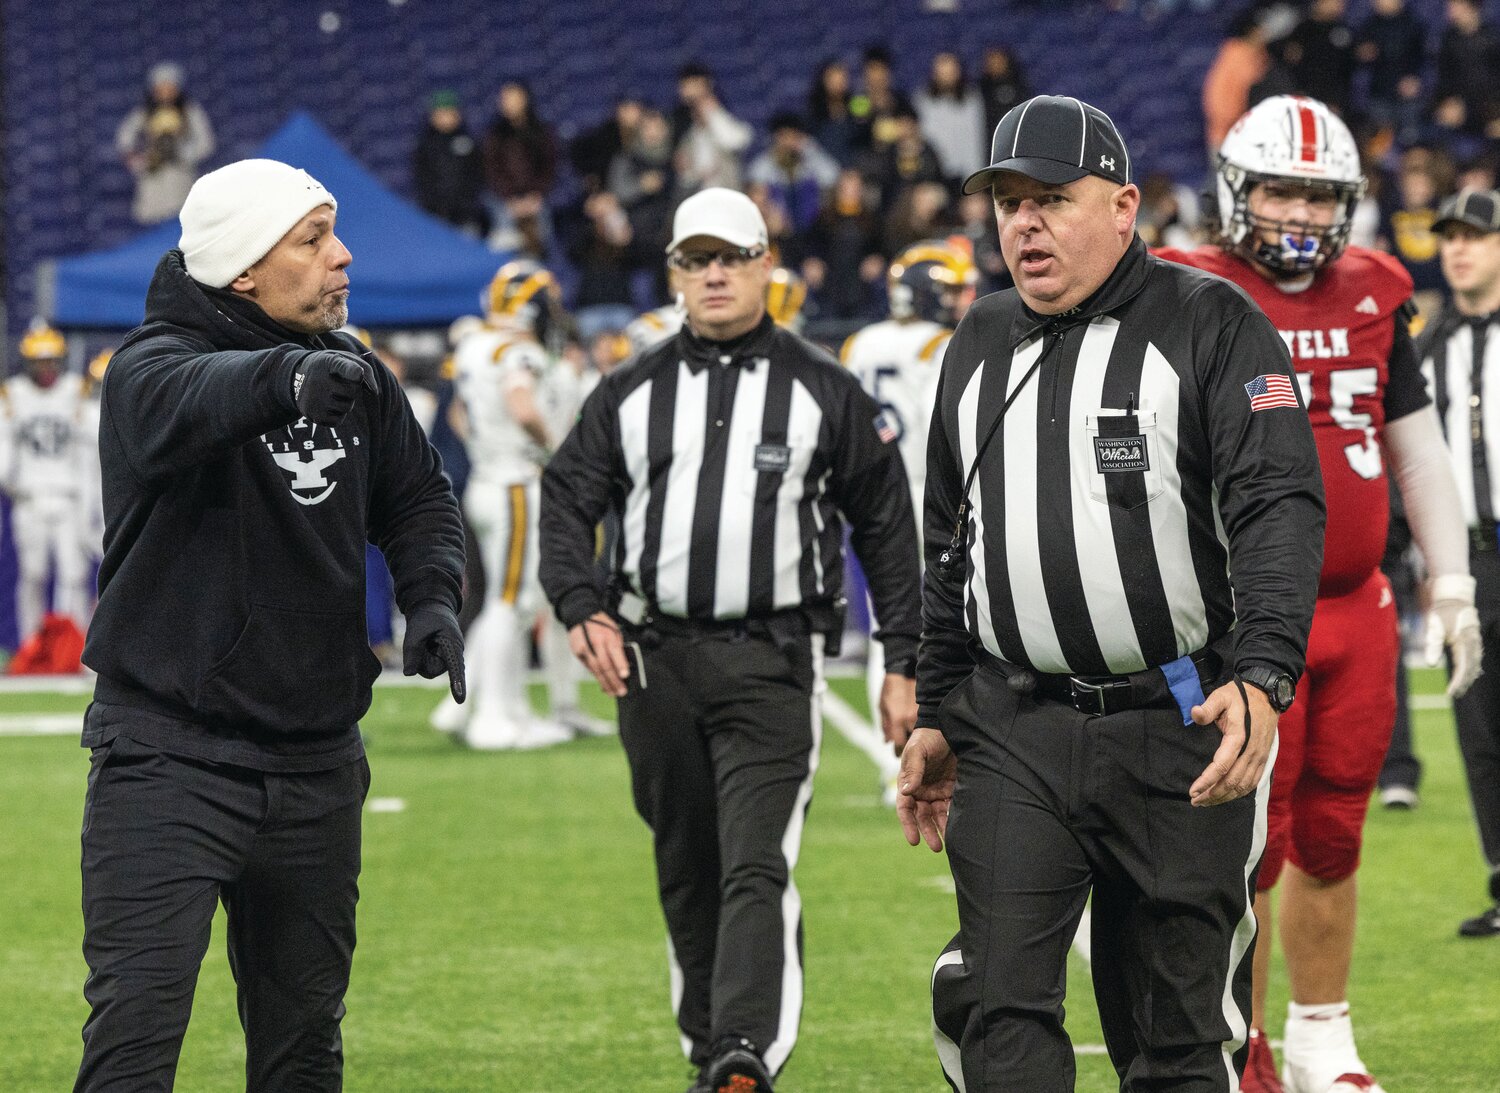 Yelm head coach Jason Ronquillo argues with referees about a call in favor of the Bellevue Wolverines during the 3A state championship game at Husky Stadium on Friday, Dec. 1.